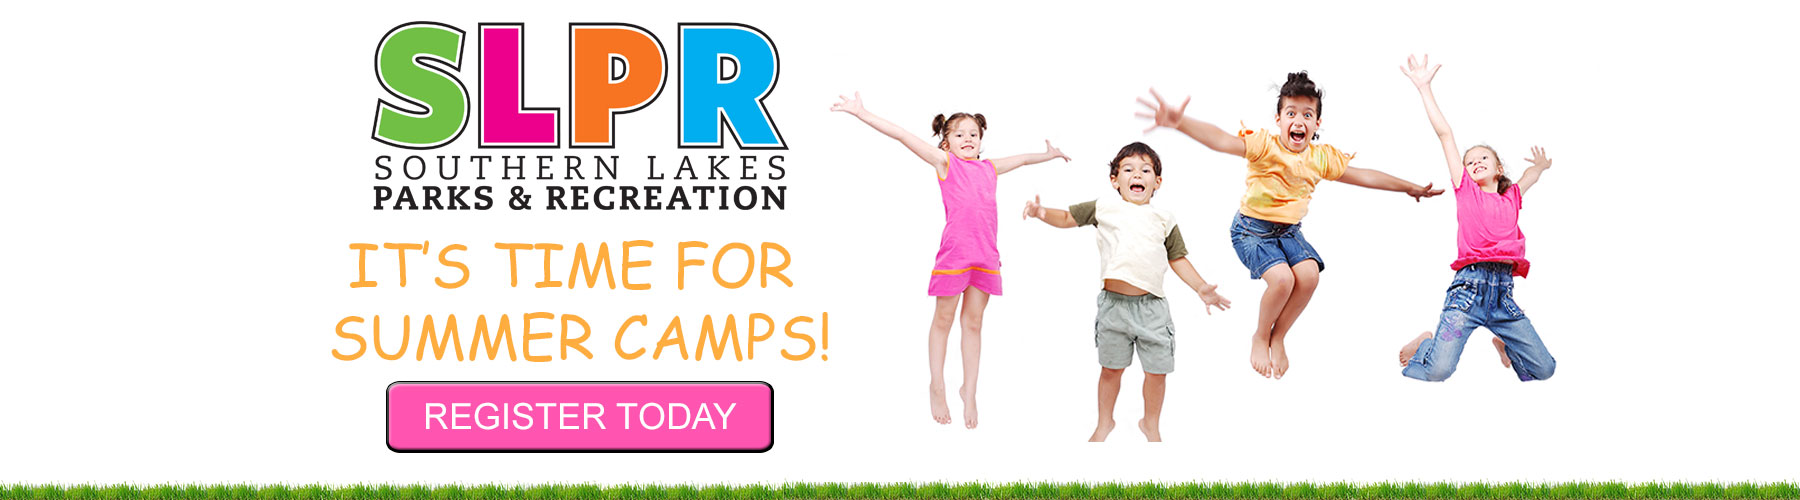 Check out the SLPR Summer Camps